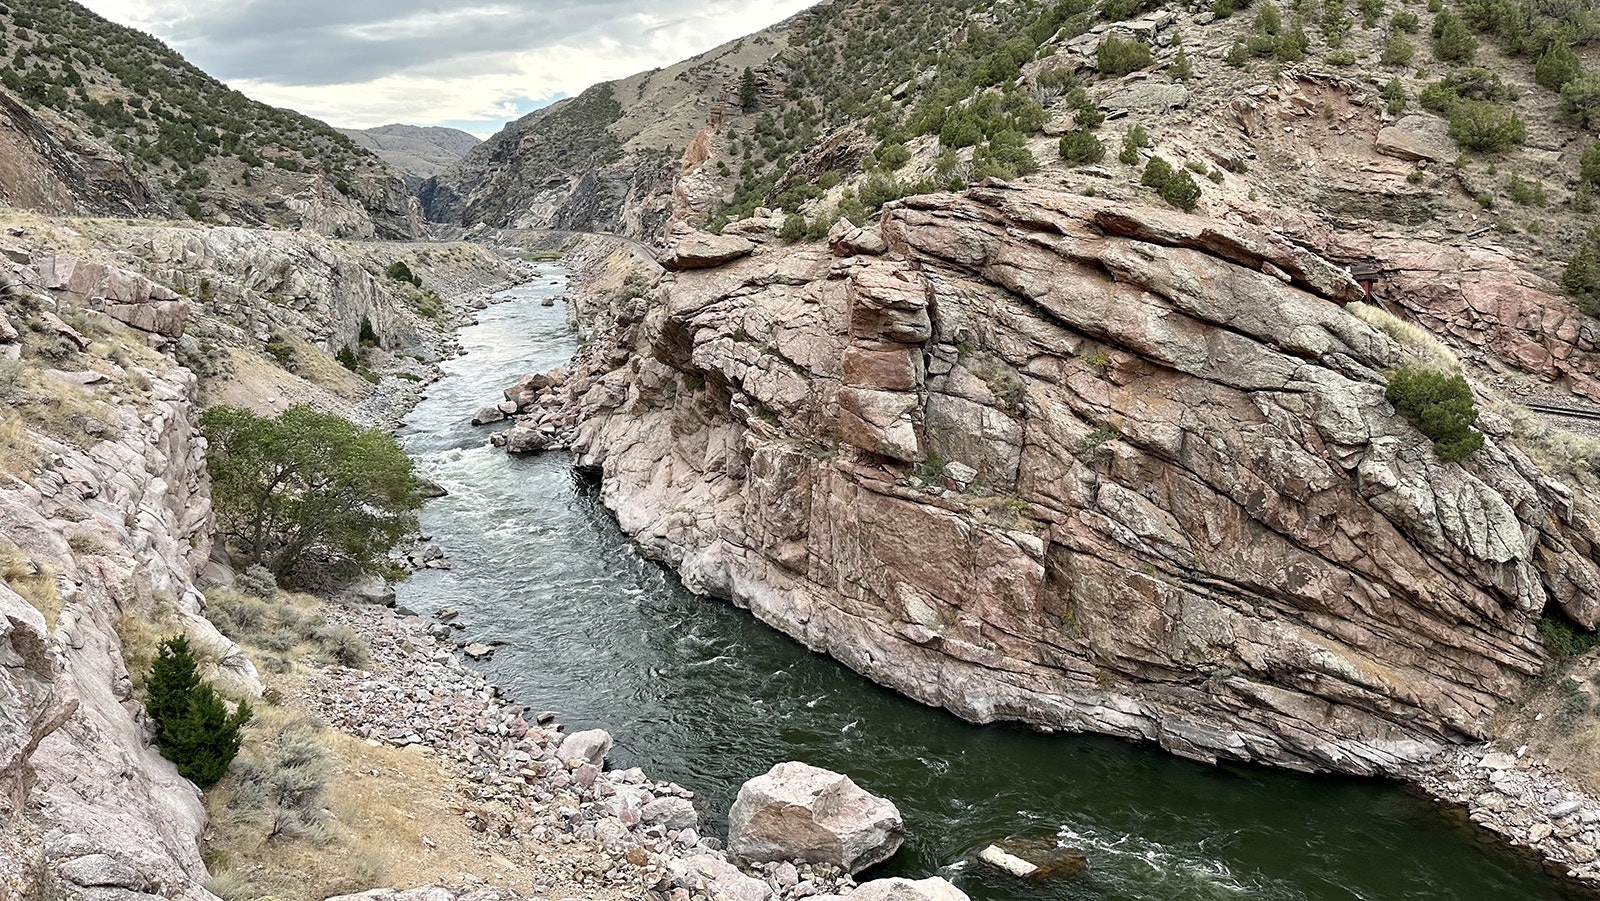 The Great Unconformity at the southern end of the Wind River Canyon. The gap between the black and pink Precambrian granite at the waterline and the juniper-covered Flathead Sandstone above it is 2 billion years of Earth's history that's vanished.